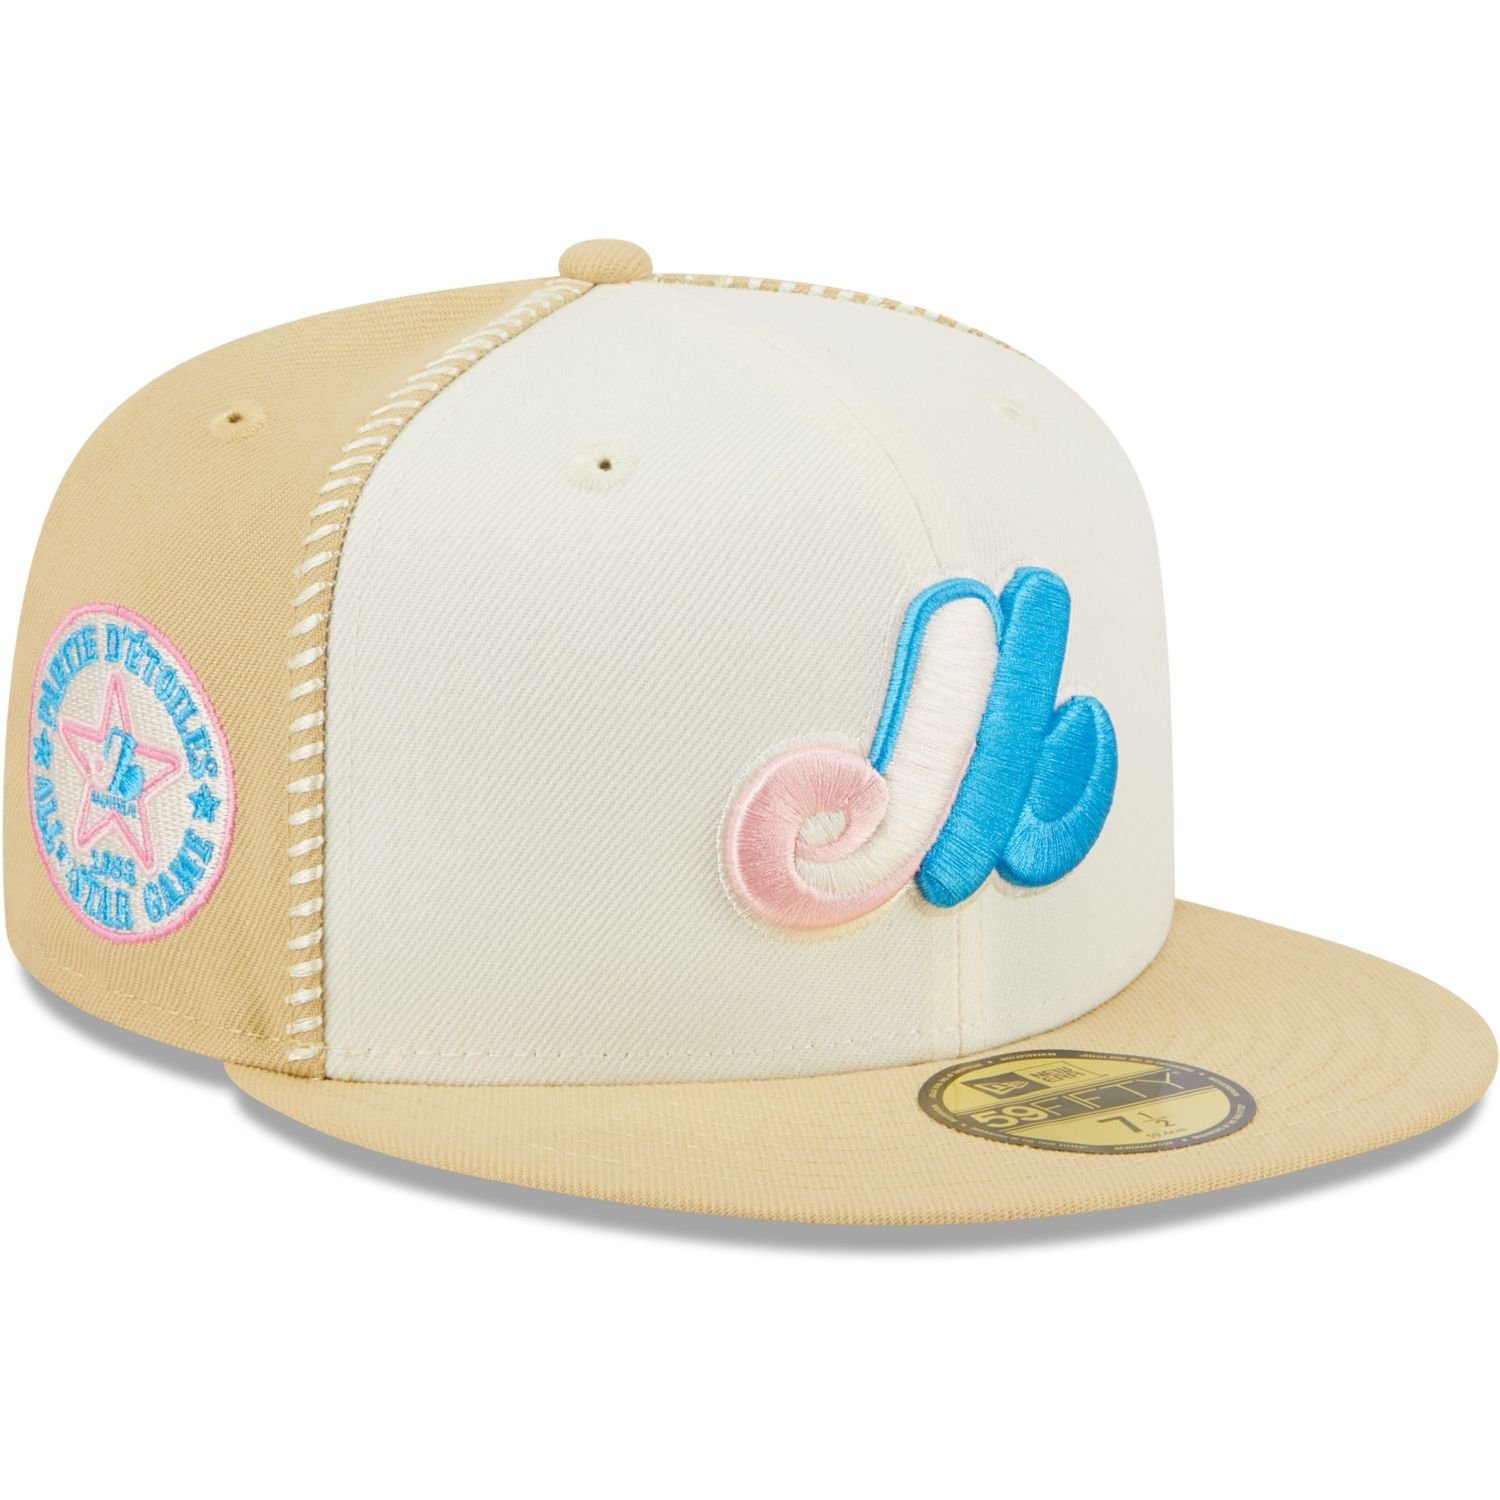 New Era Fitted Cap 59Fifty SEAM STITCH Montreal Expos